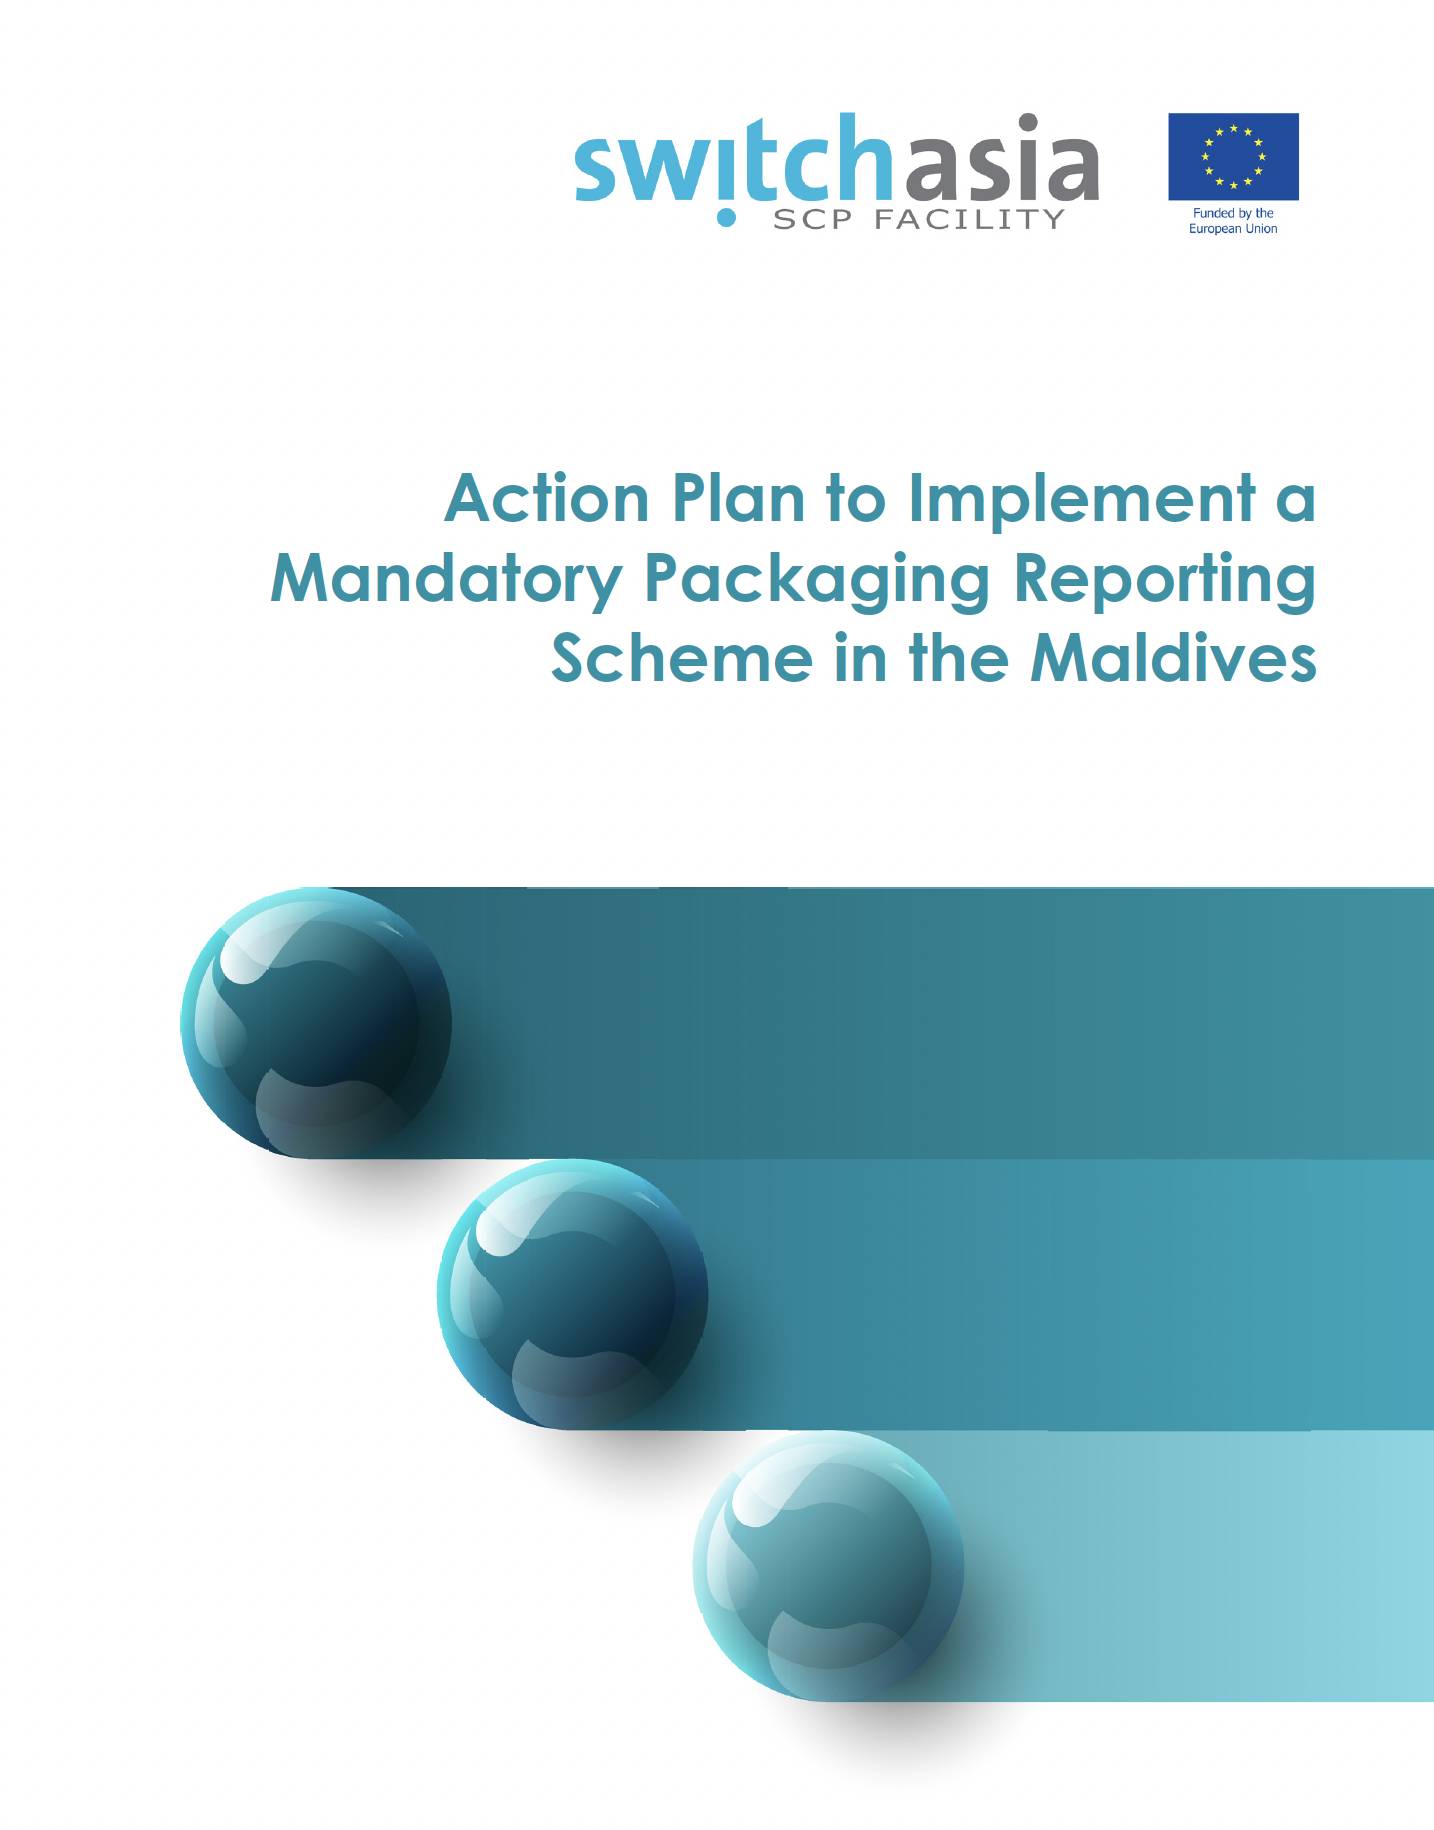 Action Plan to Implement a Mandatory Packaging Reporting Scheme in the Maldives